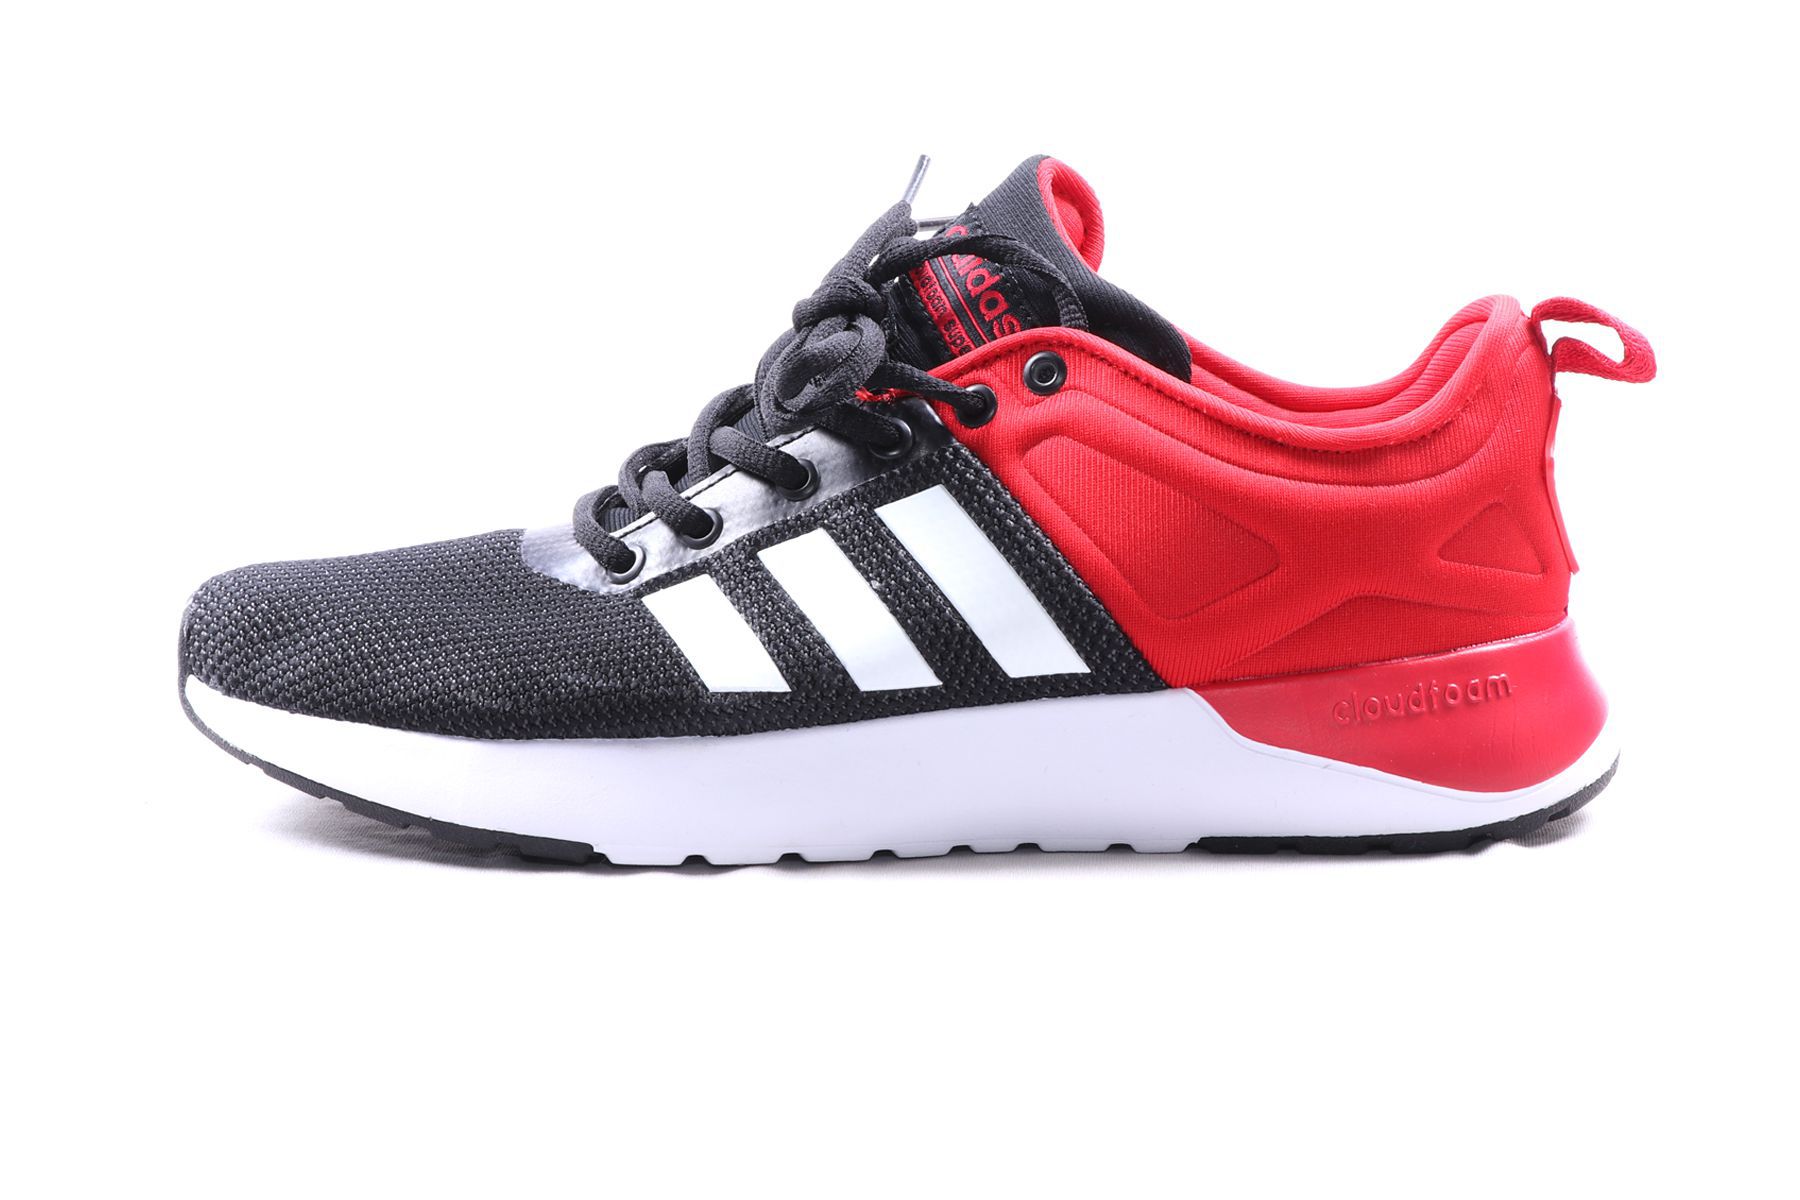 adidas cloudfoam shoes price in india